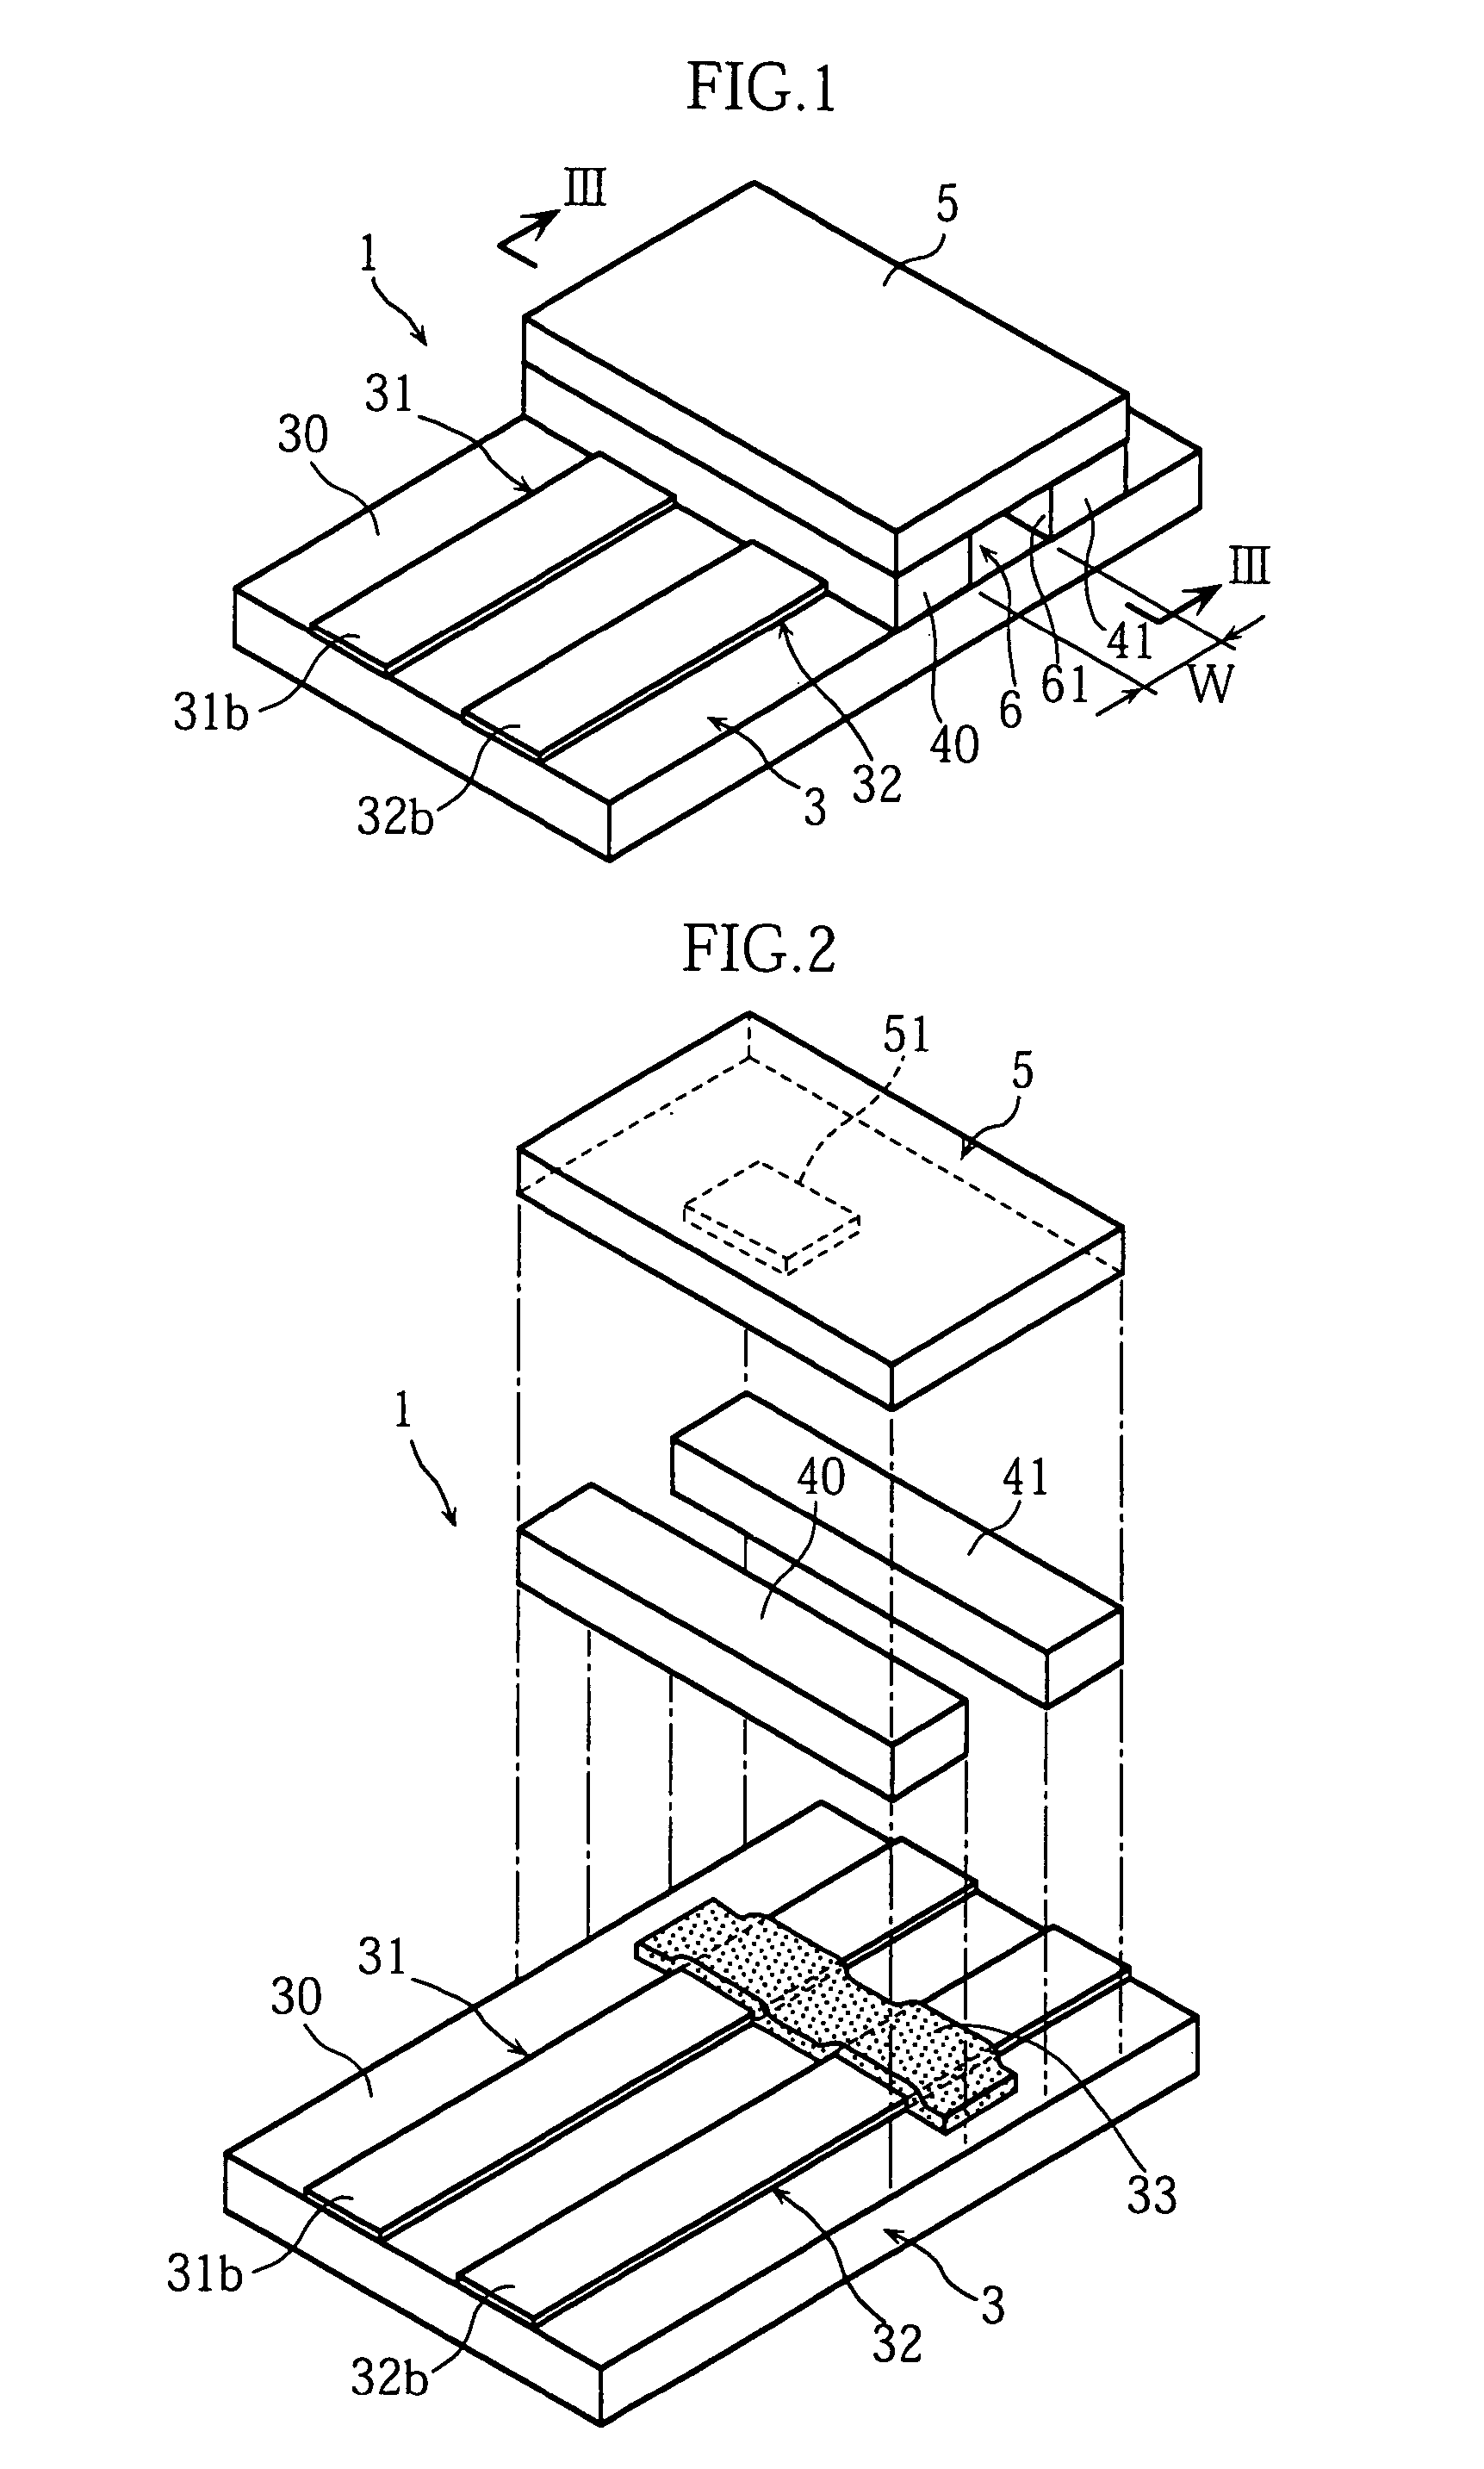 Measuring instrument provided with solid component concentrating means